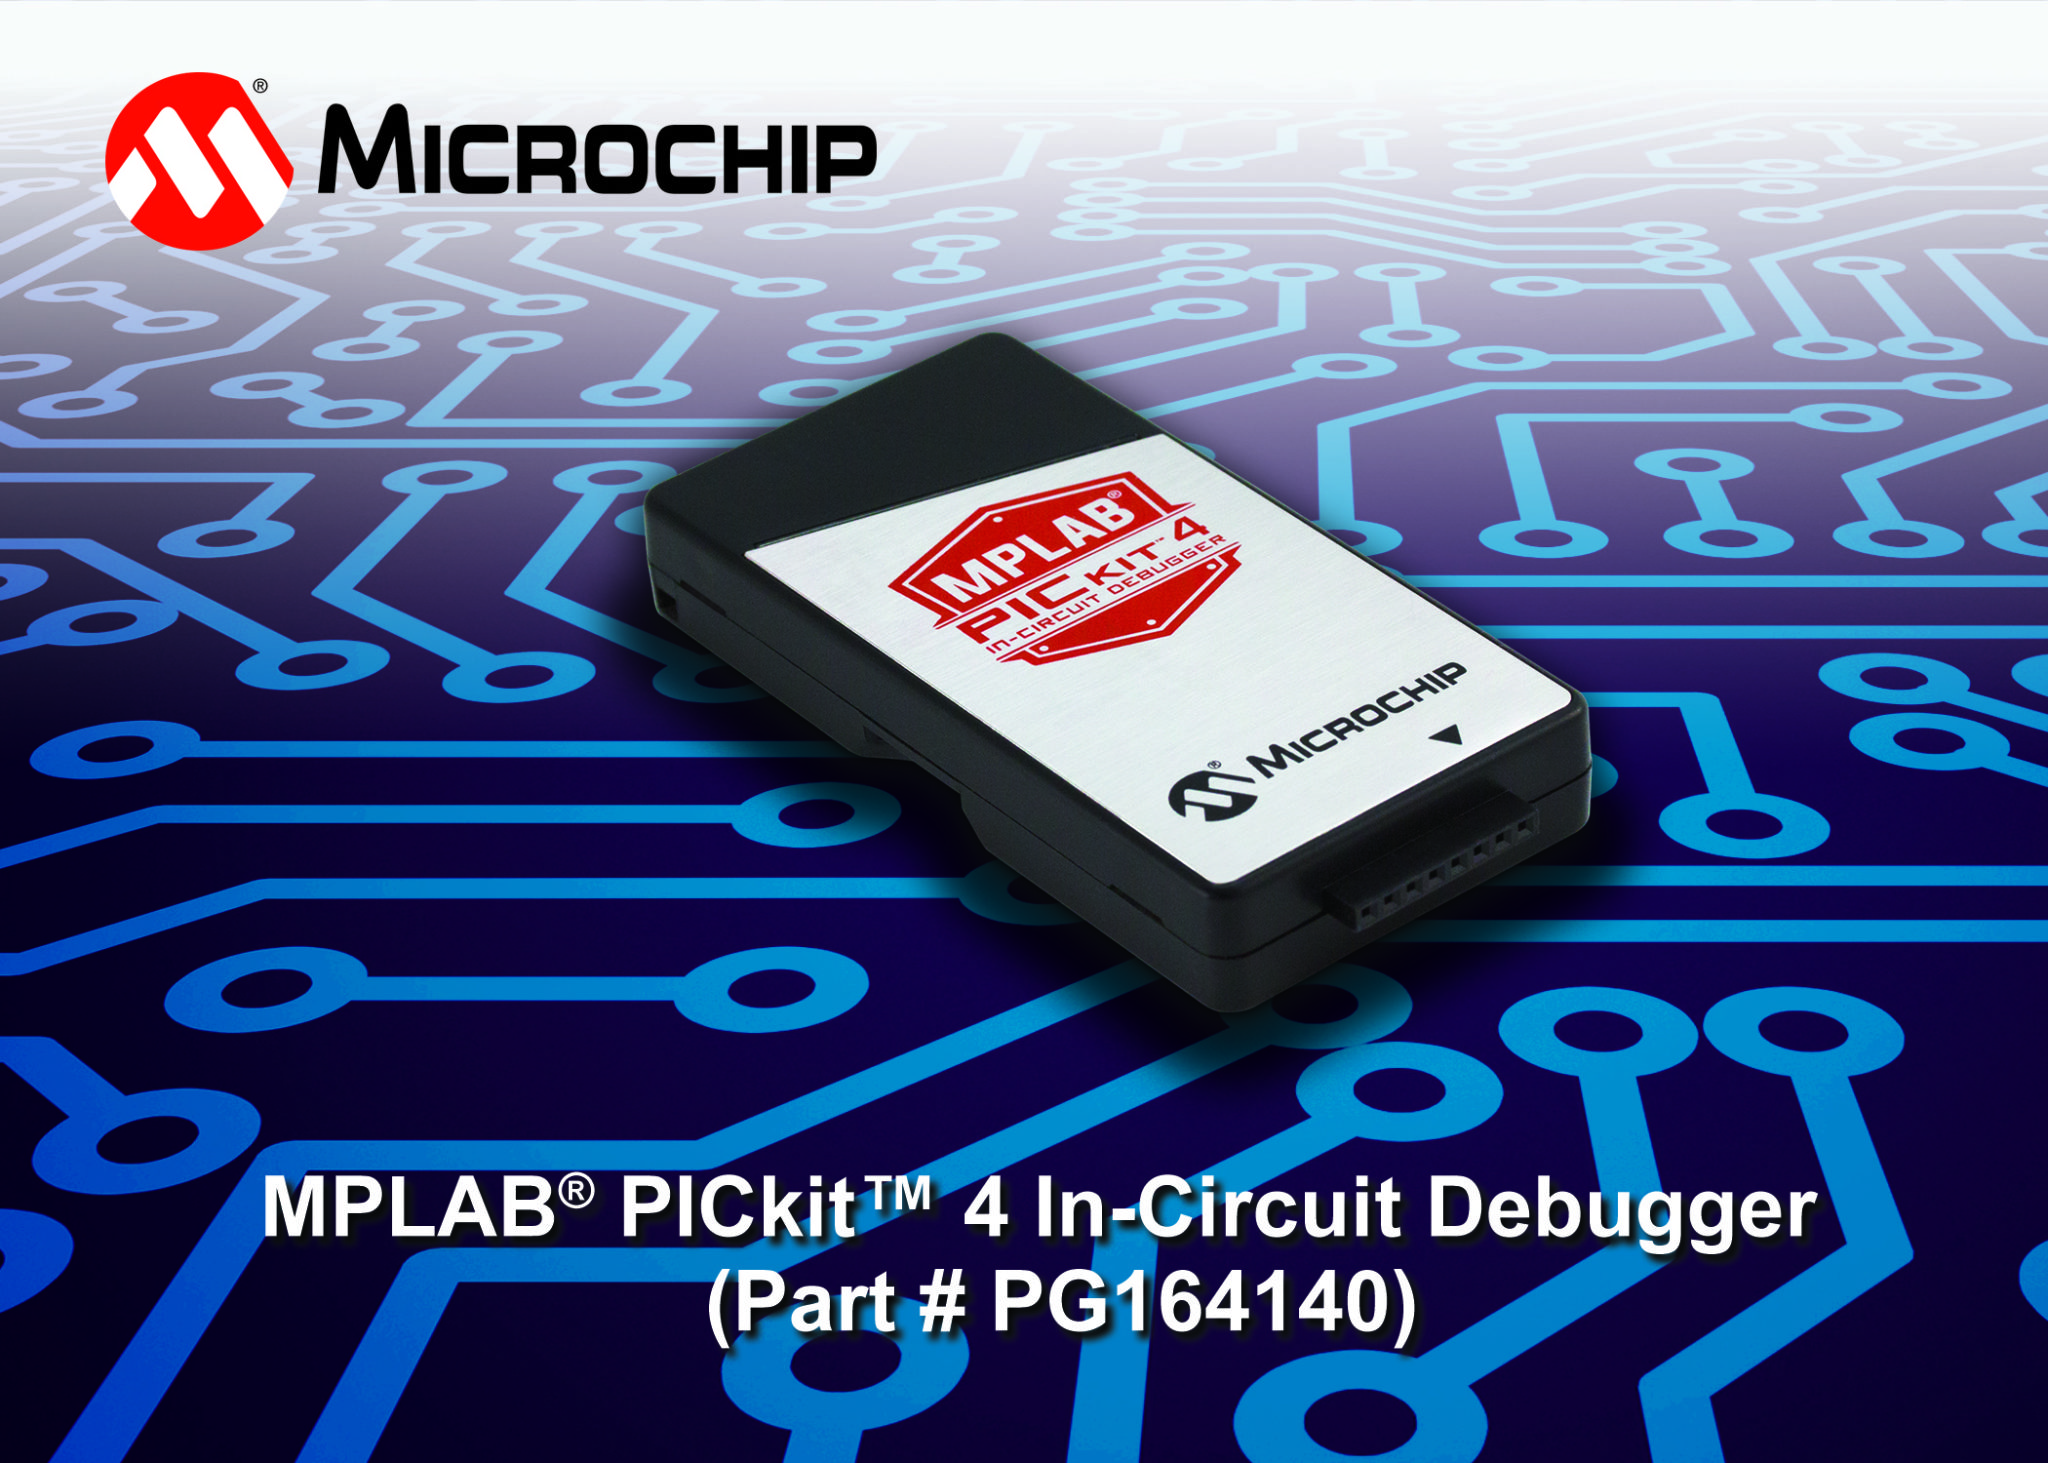 Win a Microchip MPLAB PICkit 4 In-Circuit Debugger | Spanish